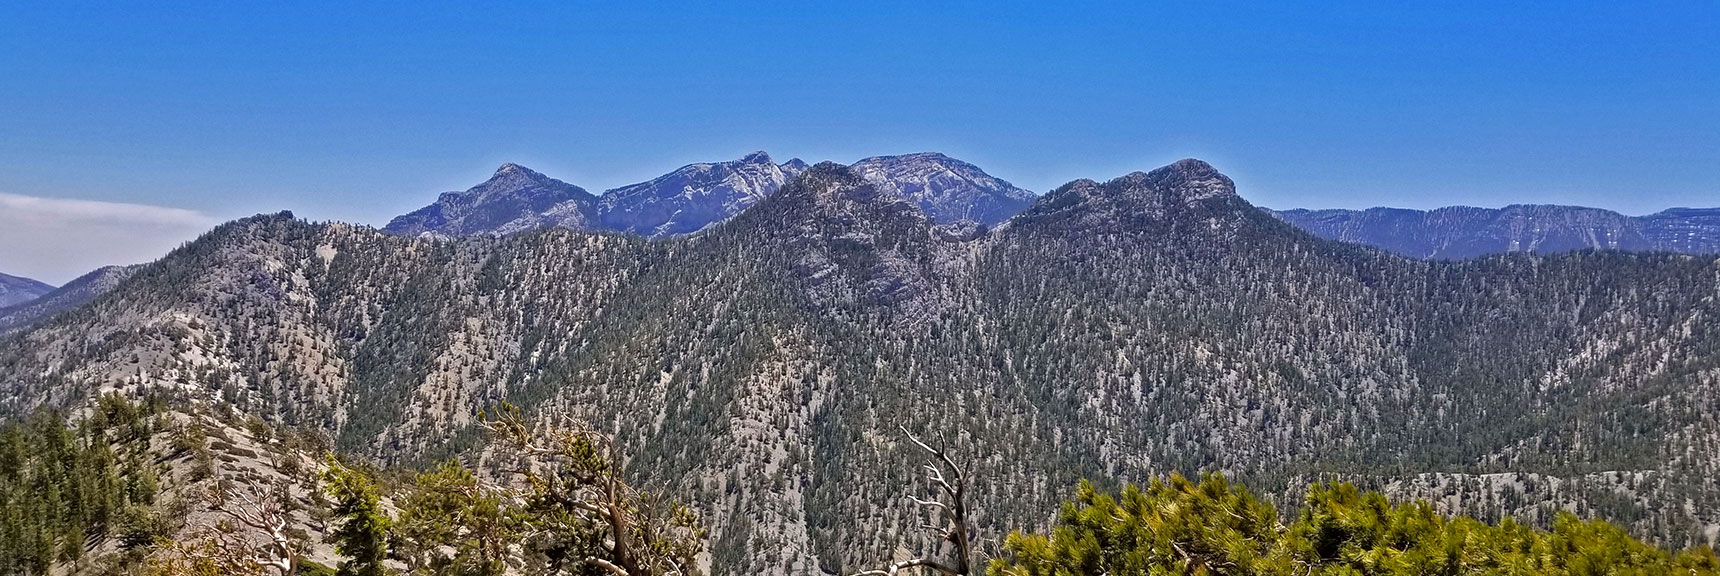 Fuller View of Mummy Mt: Head and Main Summit Area Far Background Along with Kyle Canyon North Ridge to Right | Macks Peak | Mt Charleston Wilderness | Spring Mountains, Nevada